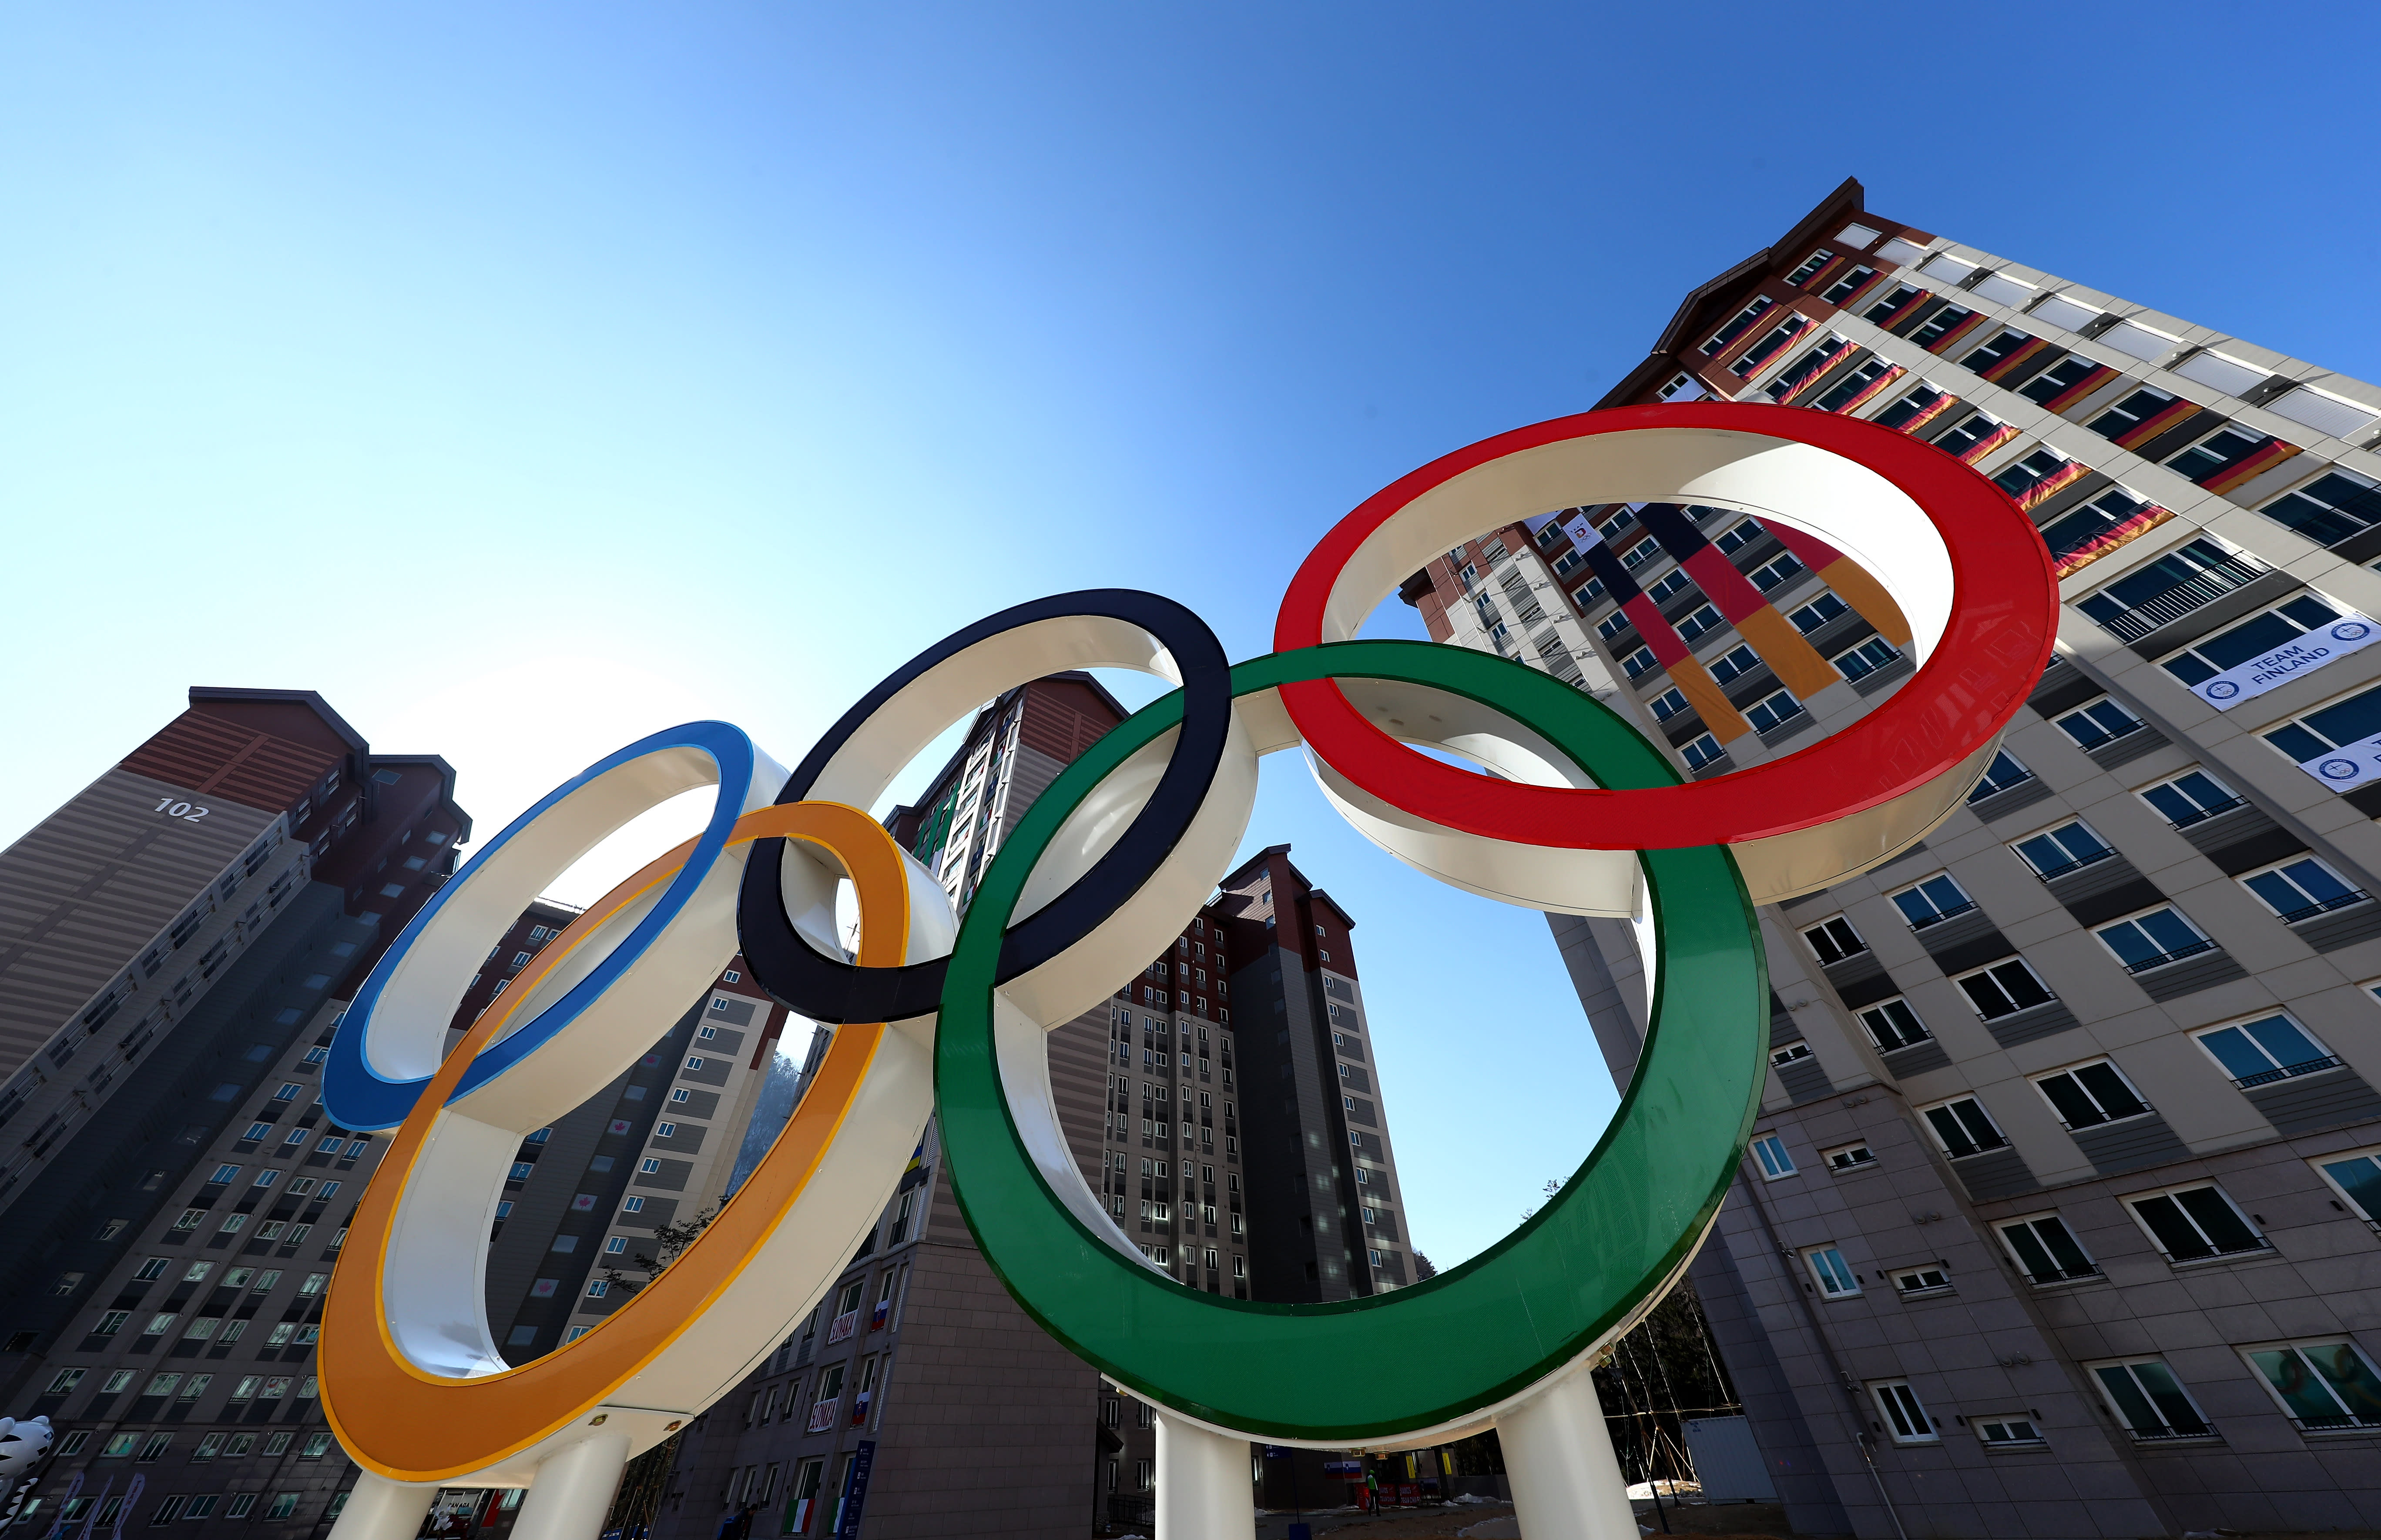 Wanted A City to Host the 2026 Winter Olympics